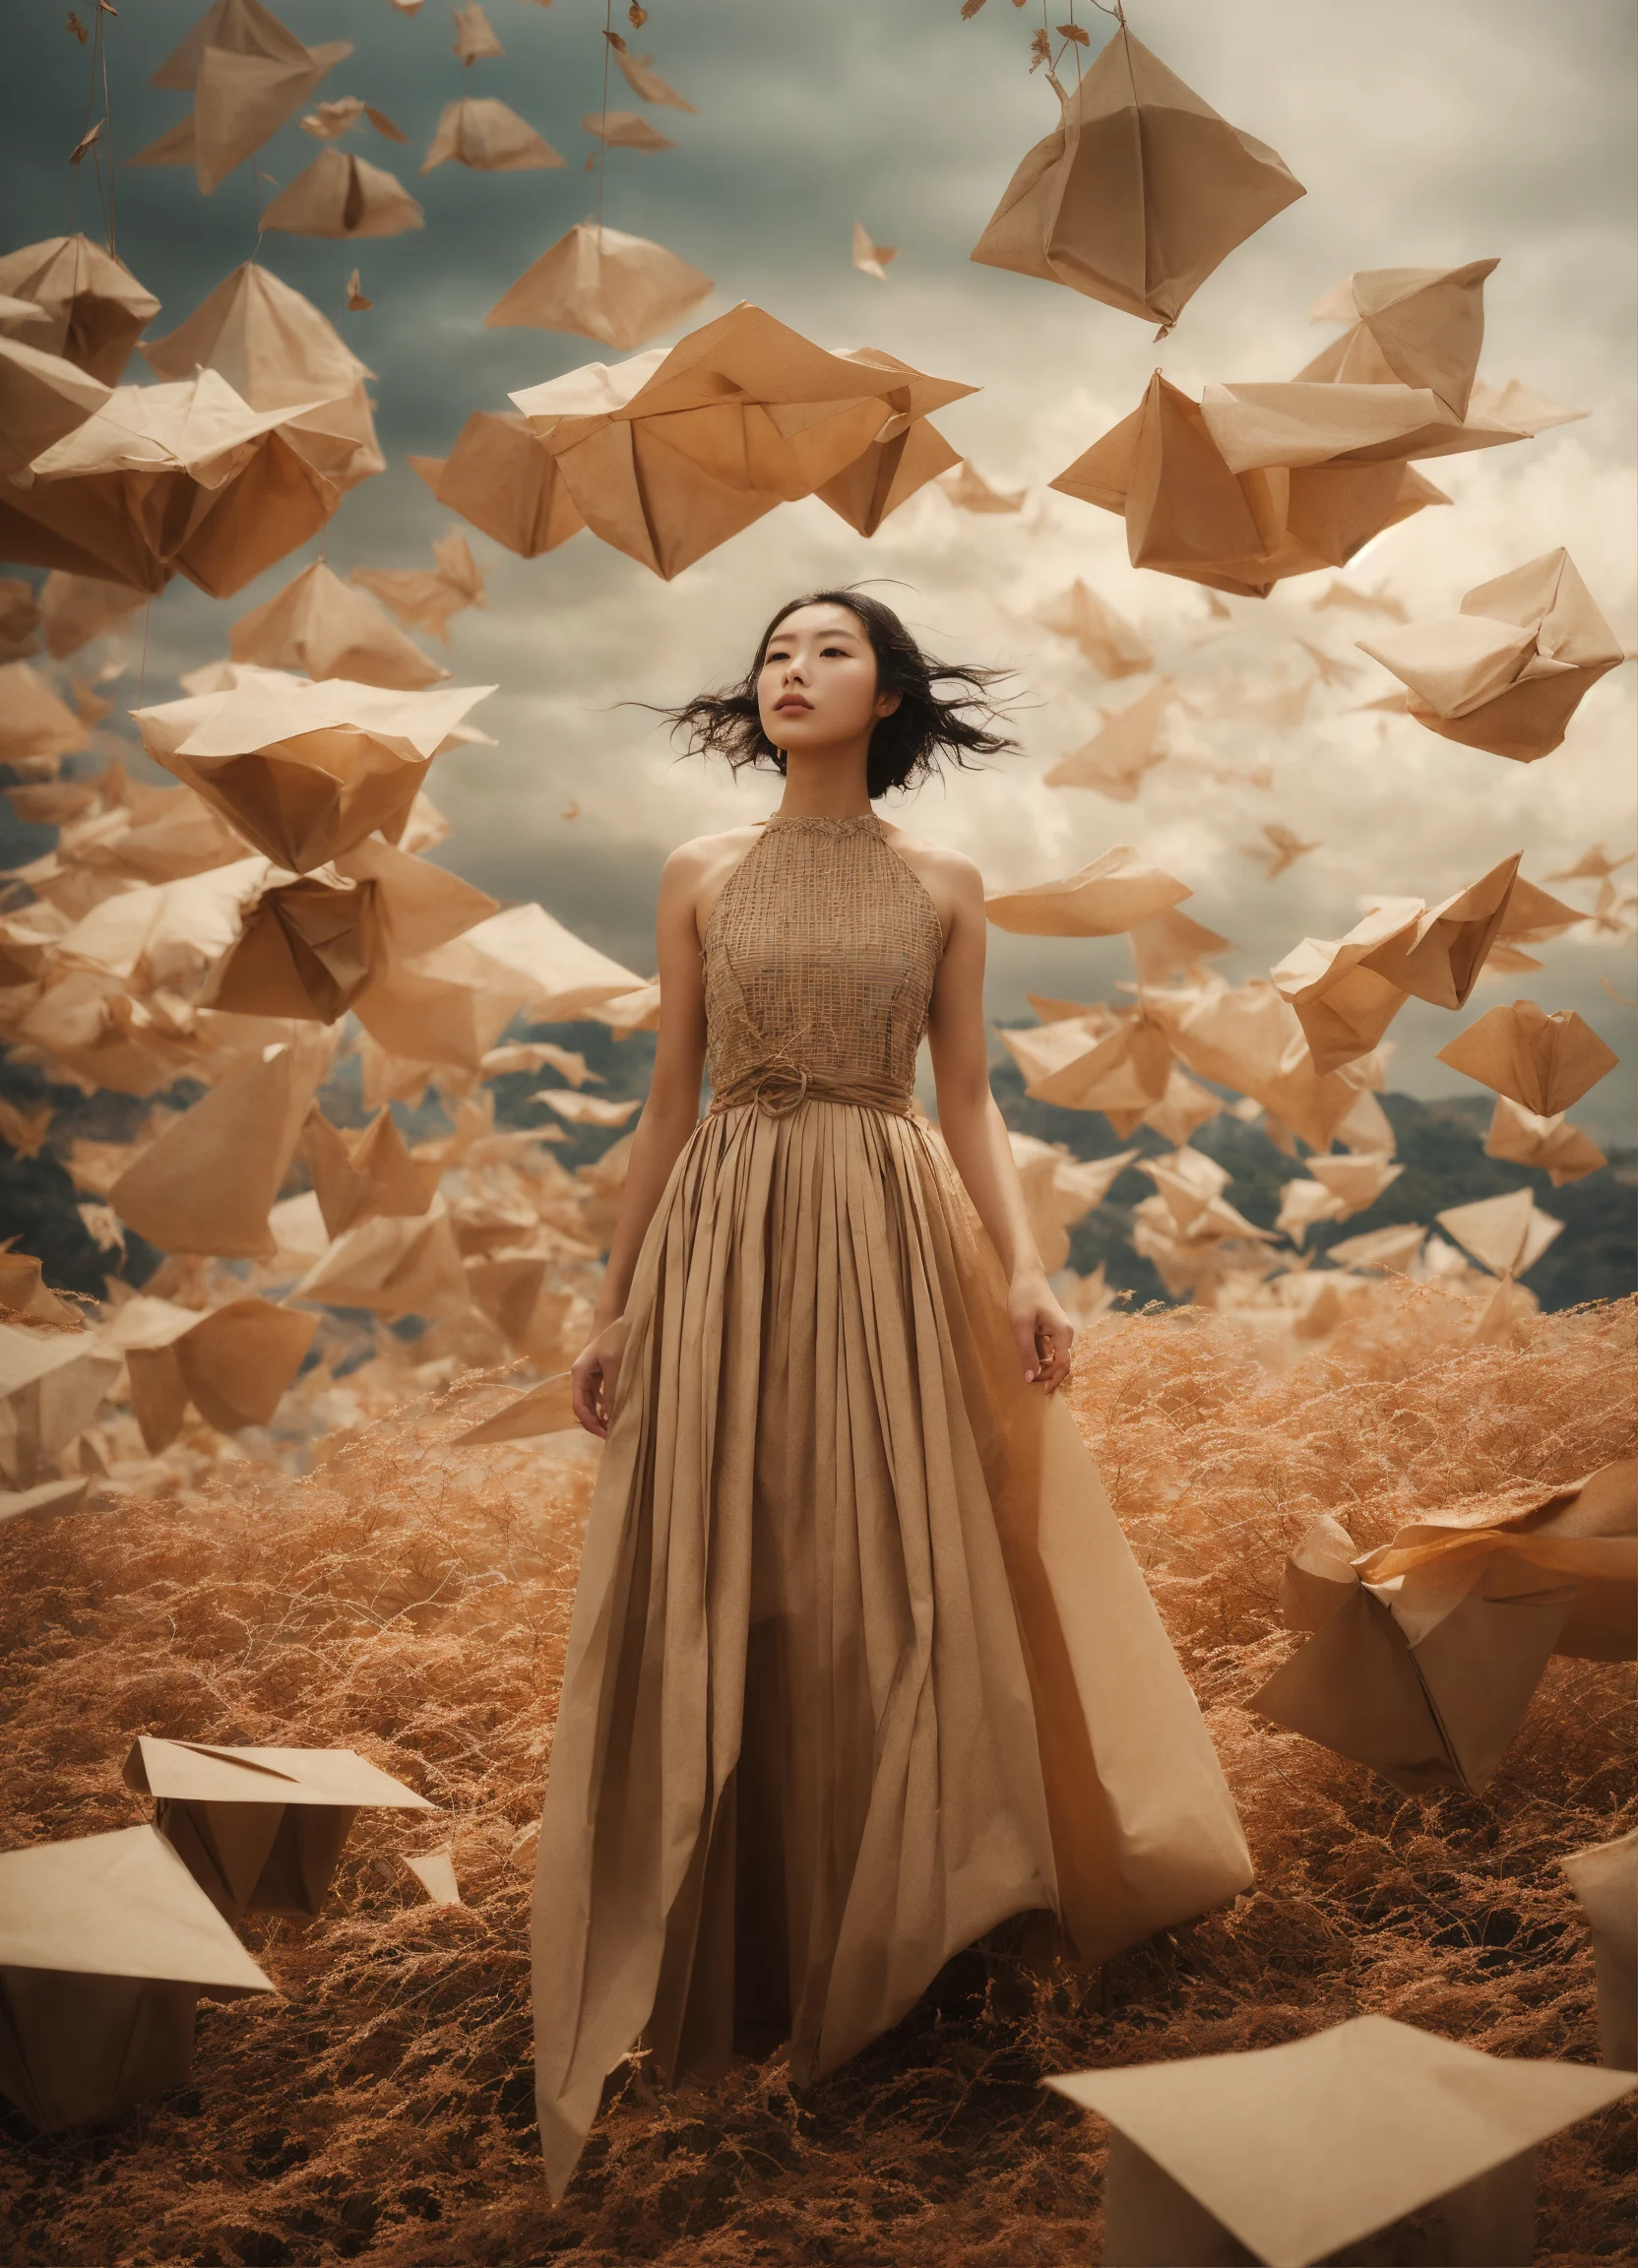 Lexica Paper Bag Clouds And Brown Origami Birds In The Sky Albino Japanese Model From 